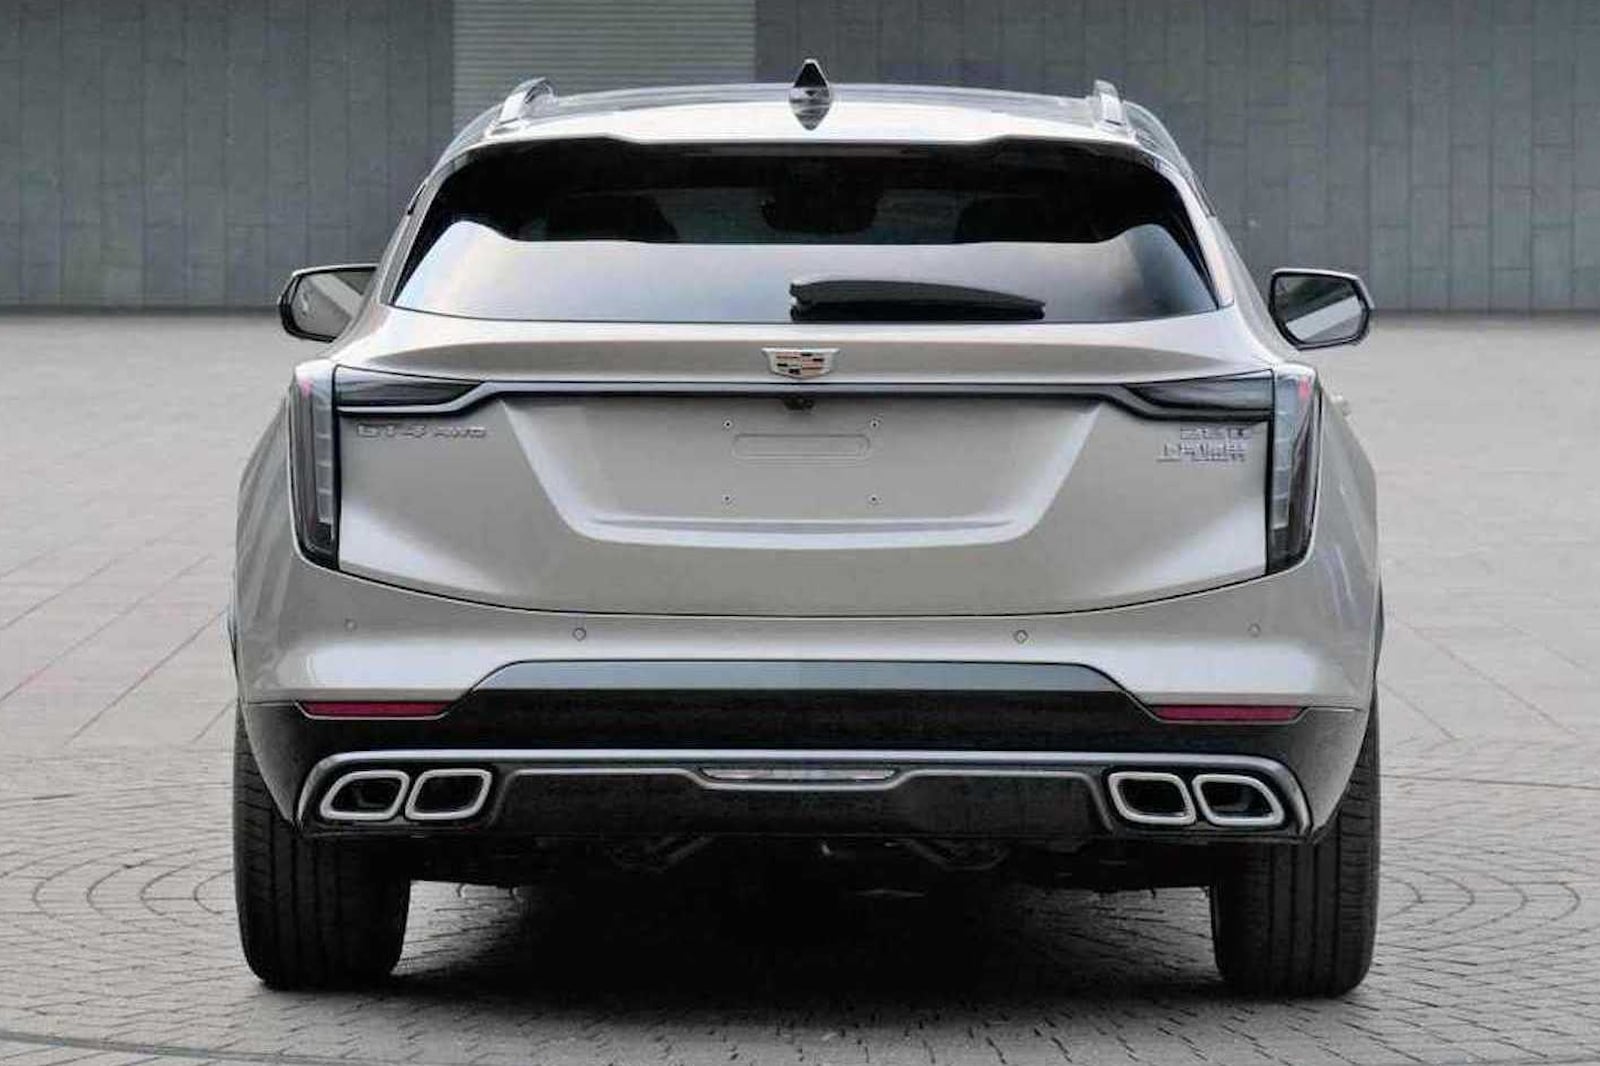 Attractive New Cadillac GT4 SUV Revealed In Leaked Images | CarBuzz